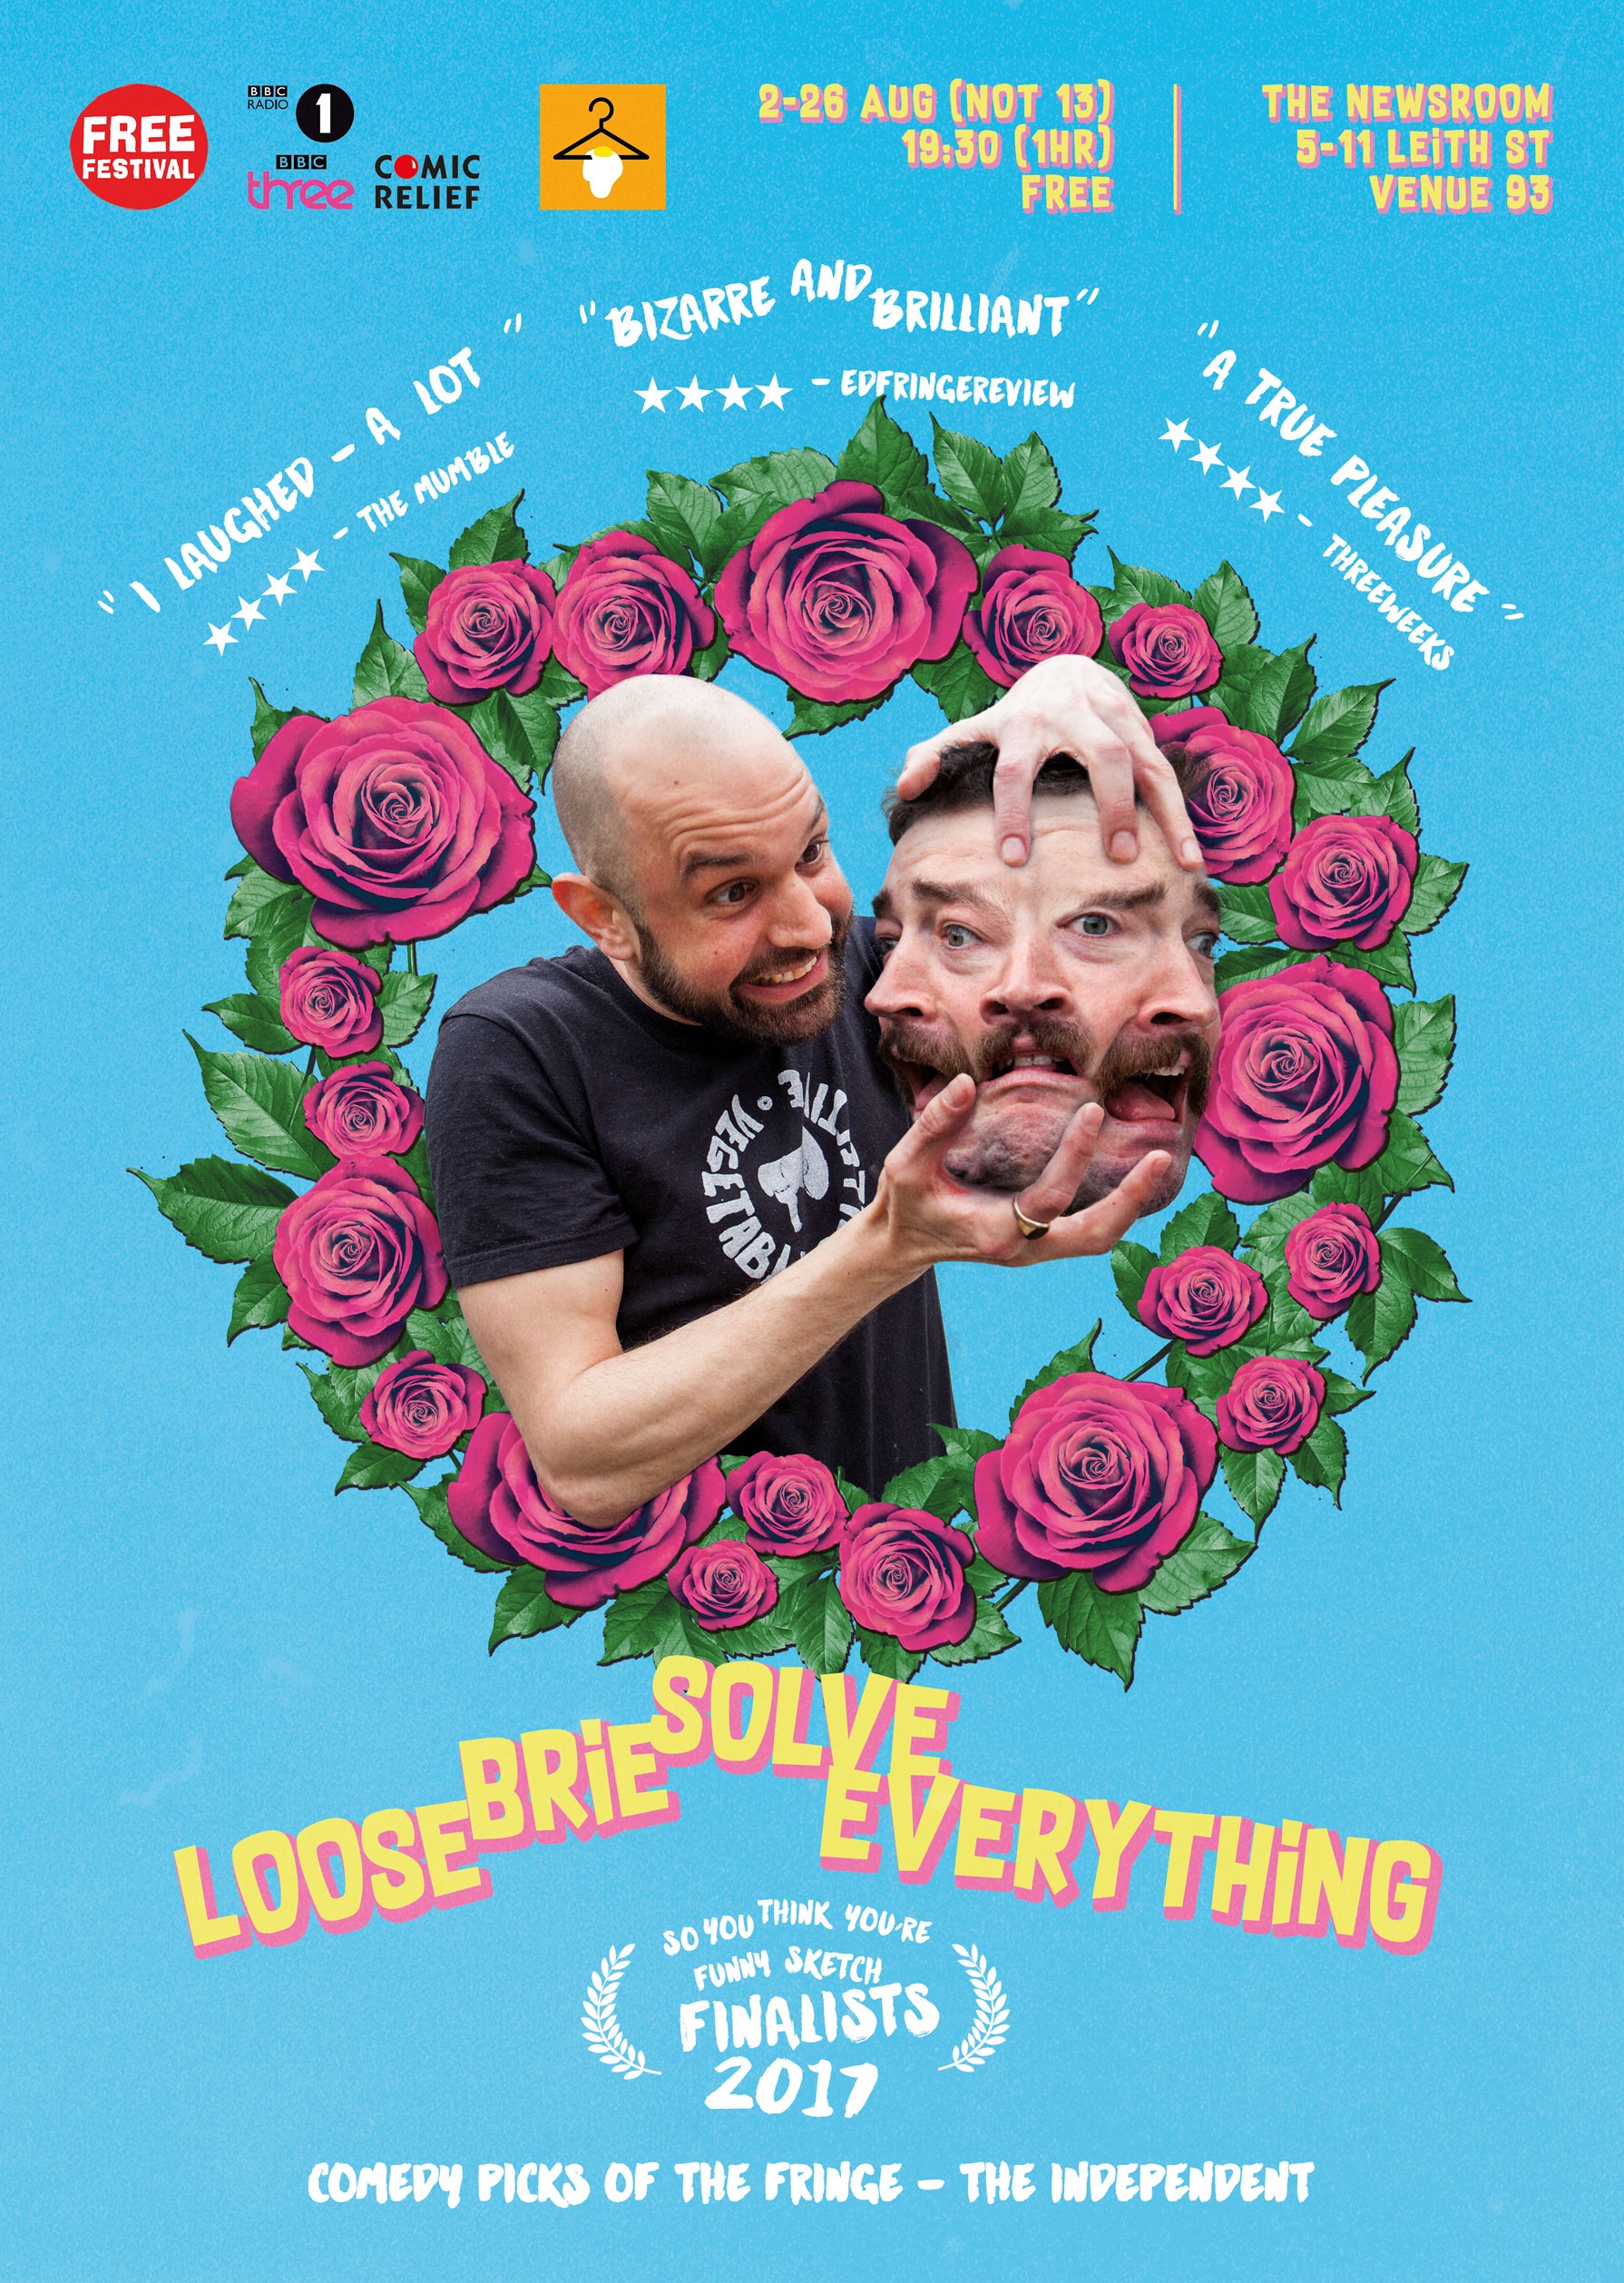 The poster for Loose Brie Solve Everything